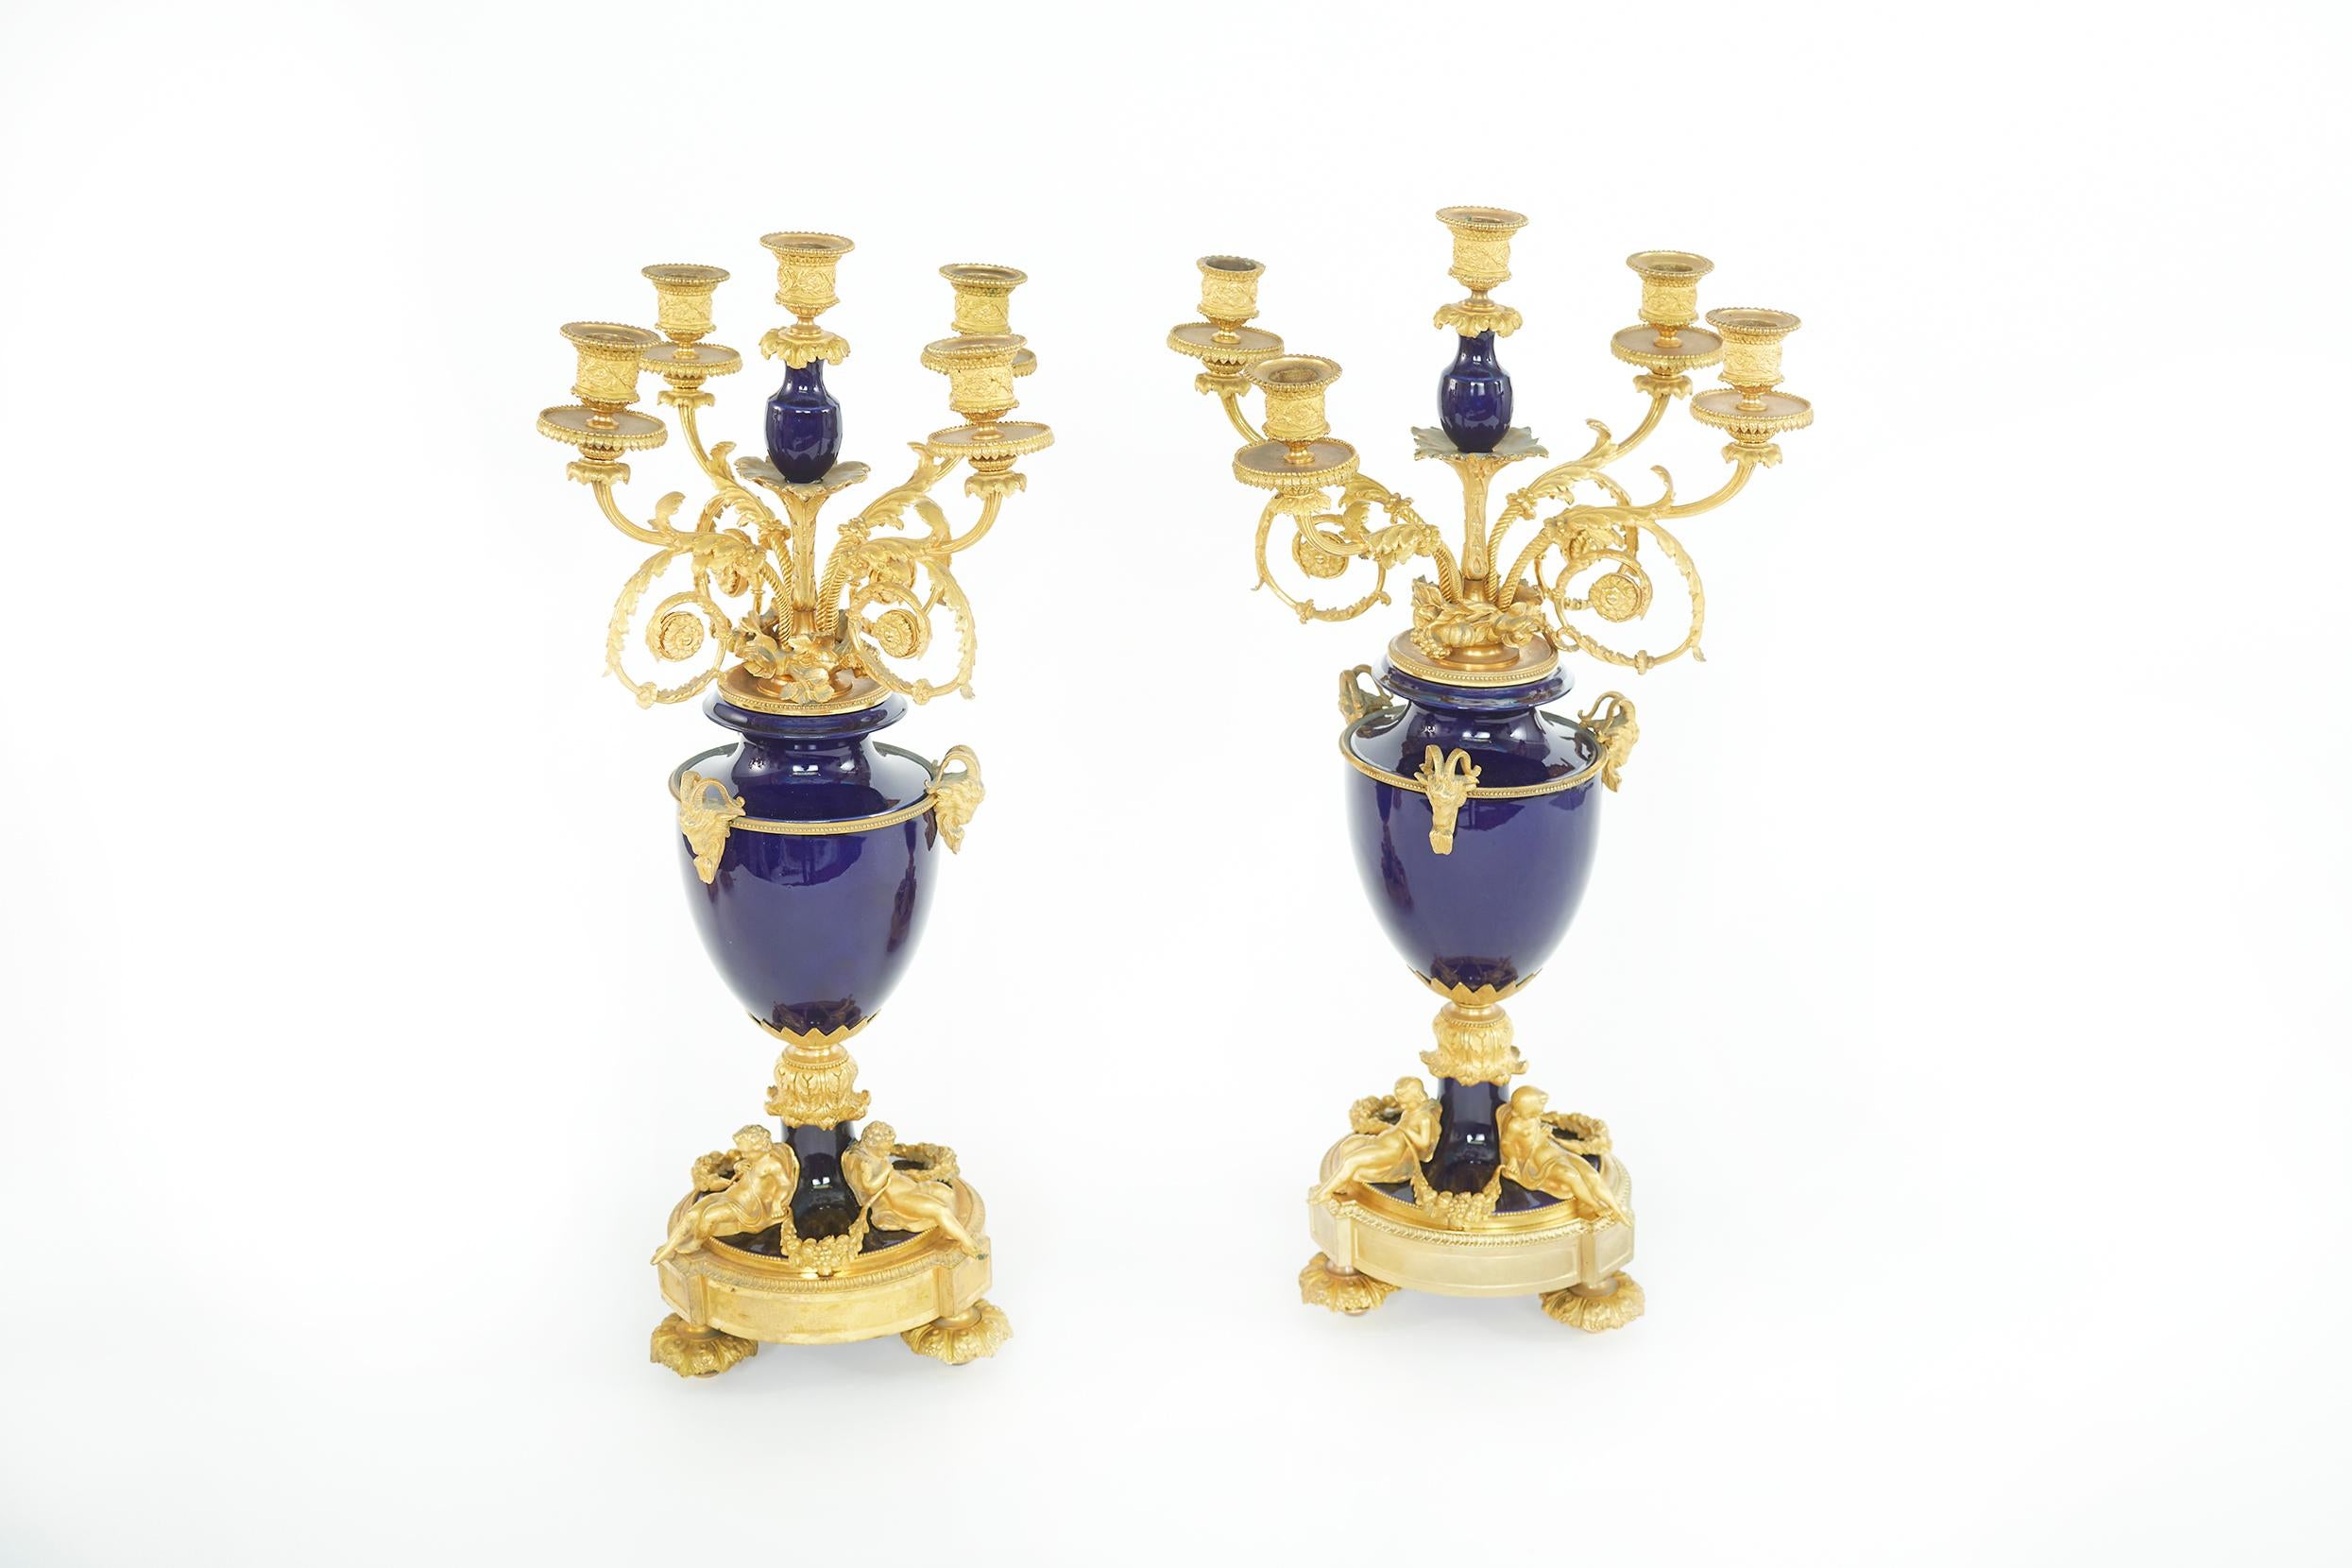 19th century bronze ormolu mounted framed with porcelain pair of five light candelabra. Each piece featuring an urn shape with five light candelabras with a cobalt background and gilt details. Each one is in great antique condition. Minor wear